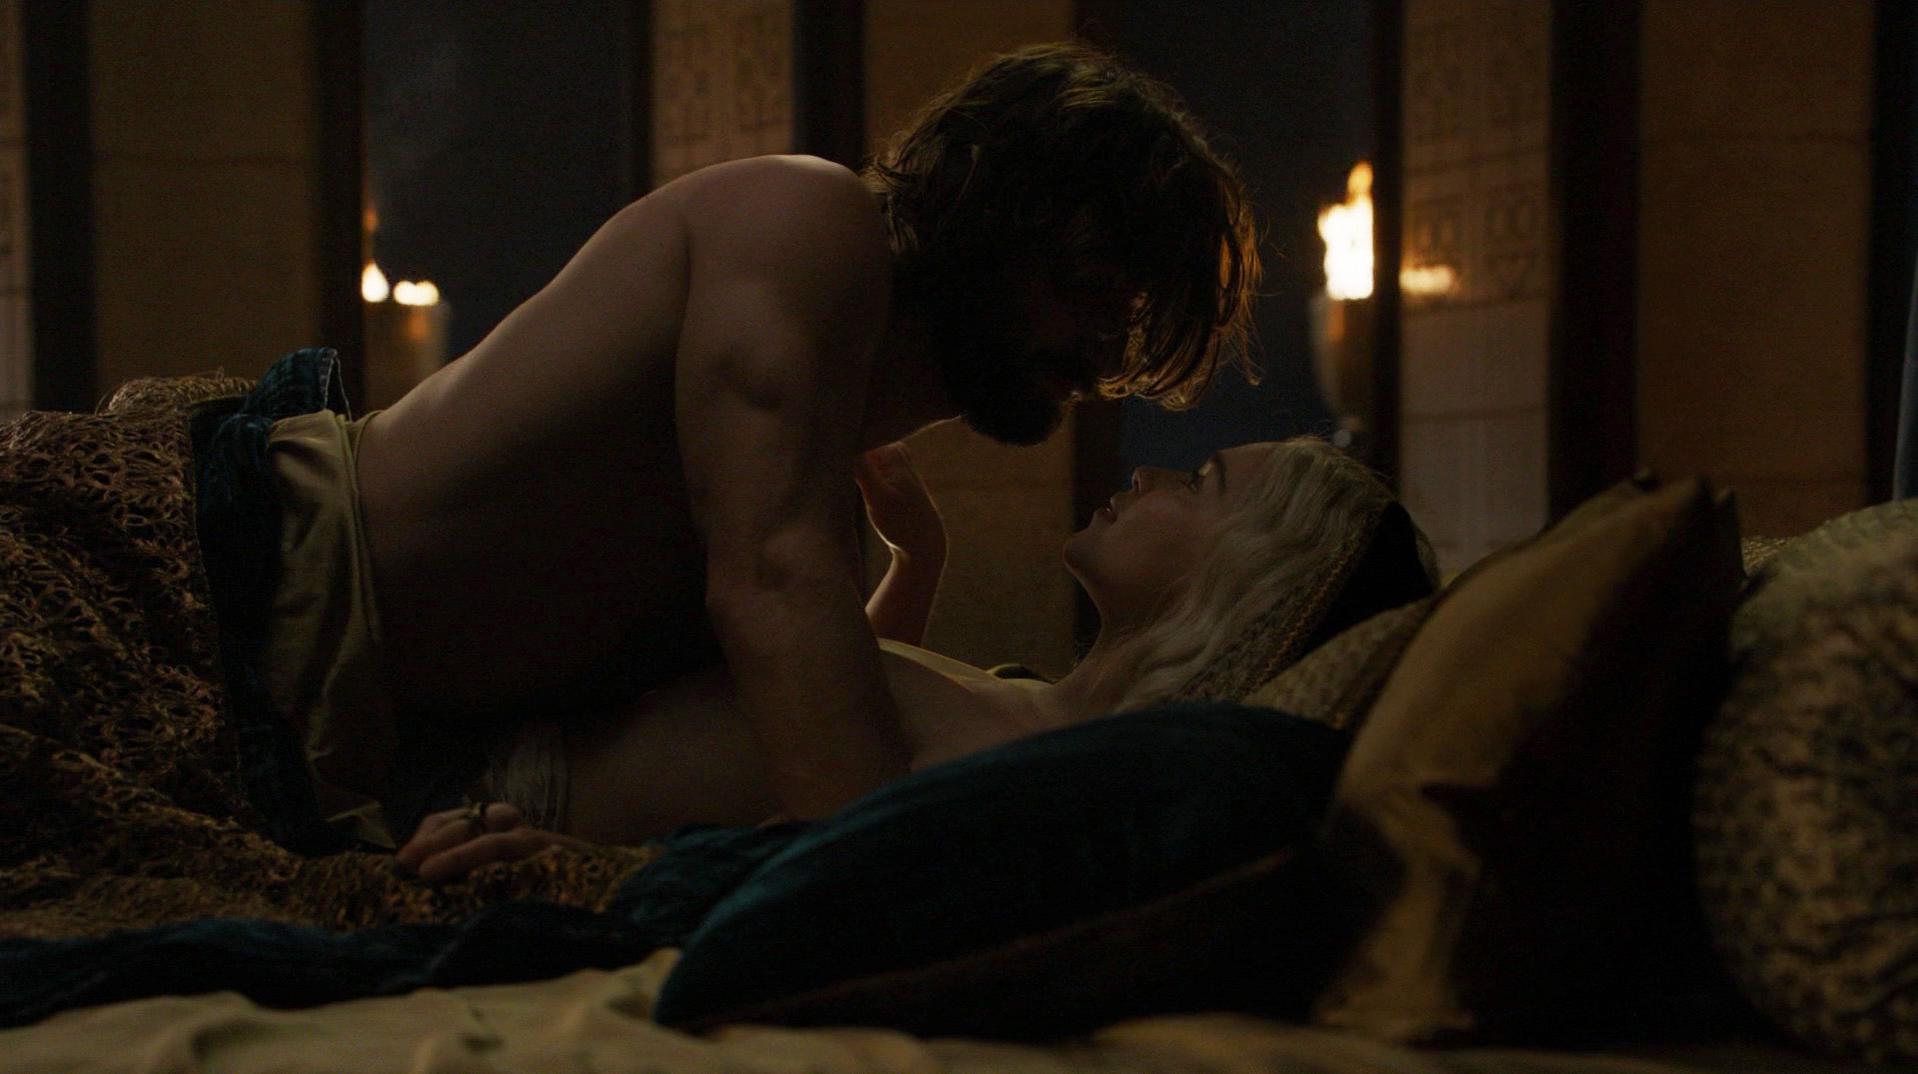 Nude Video Celebs Tv Show Game Of Thrones